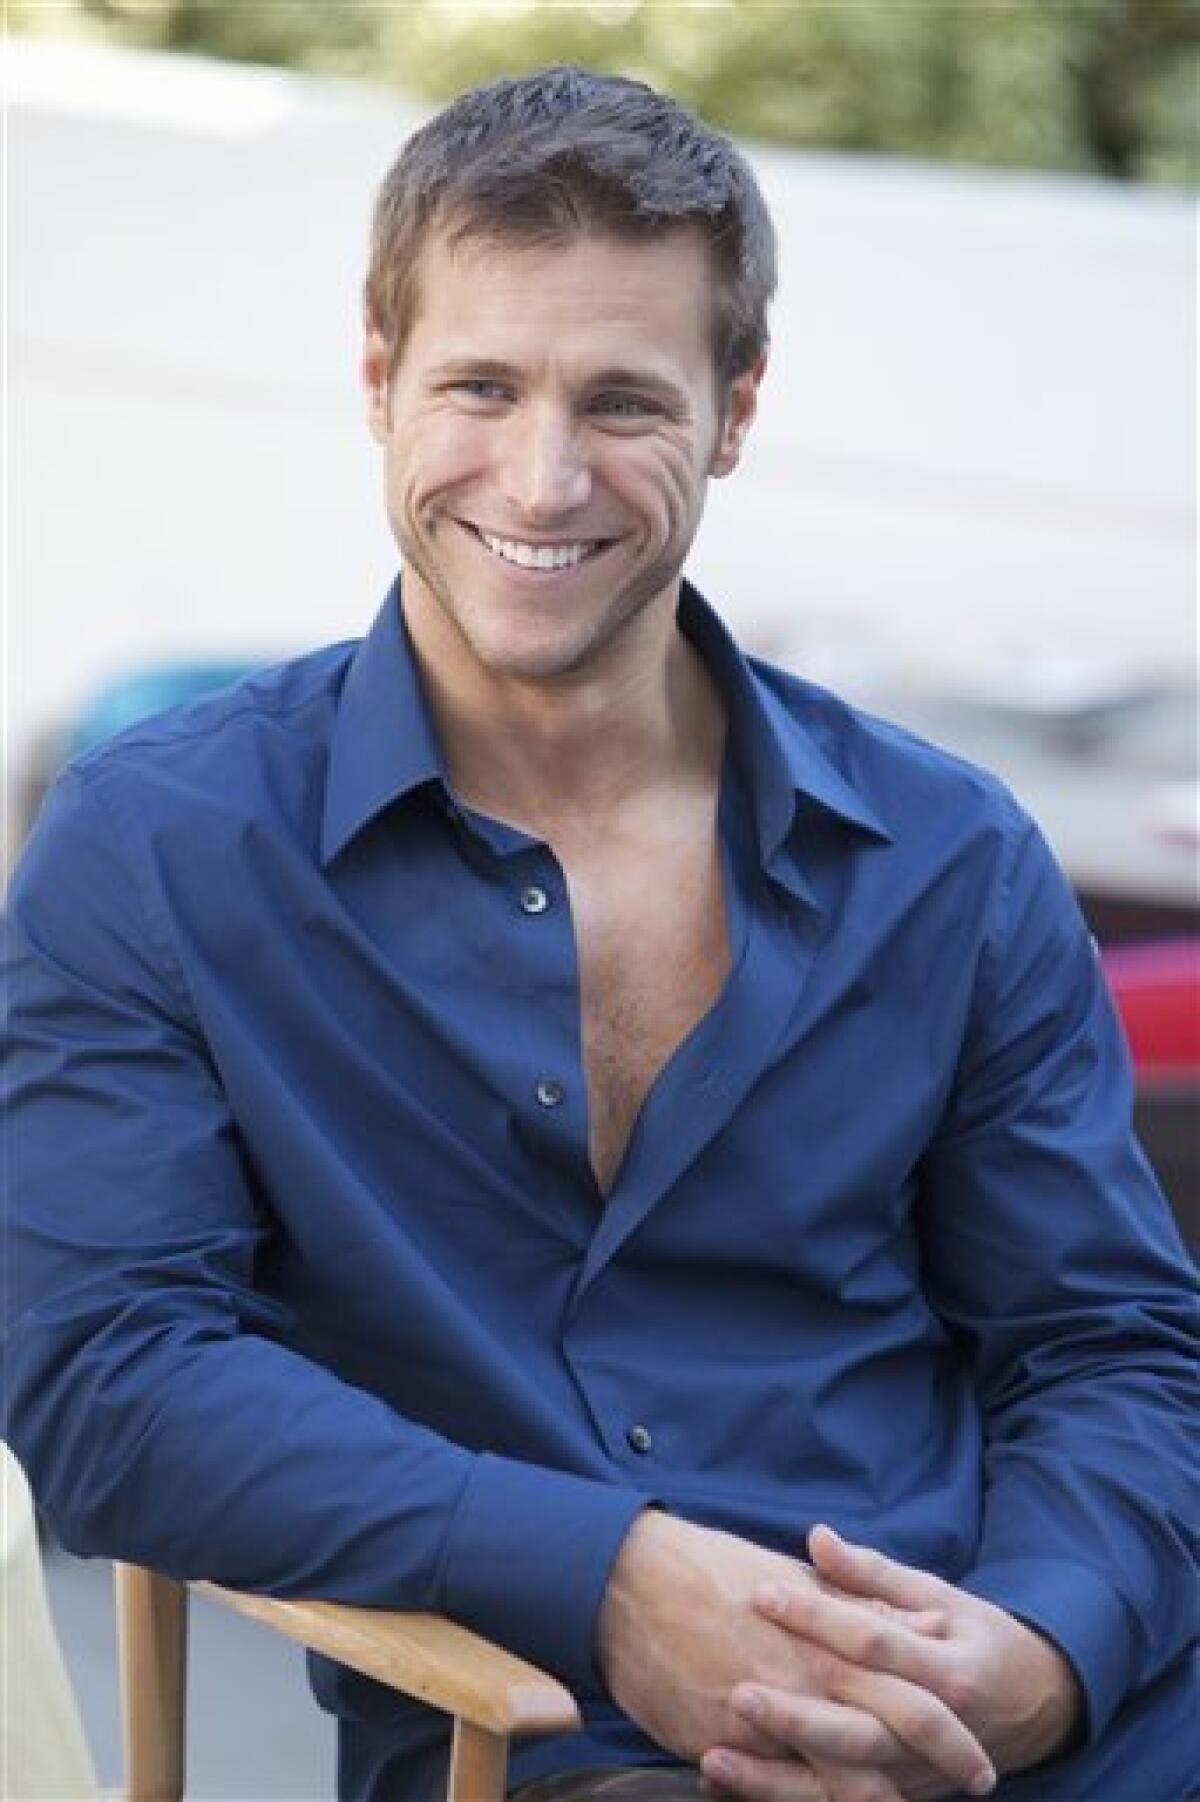 In this undated publicity image released by ABC, bachelor Jake Pavelka,is shown during the filming of the romance reality series, "The Bachelor" . (AP Photo/ABC, Greg Zabilski)